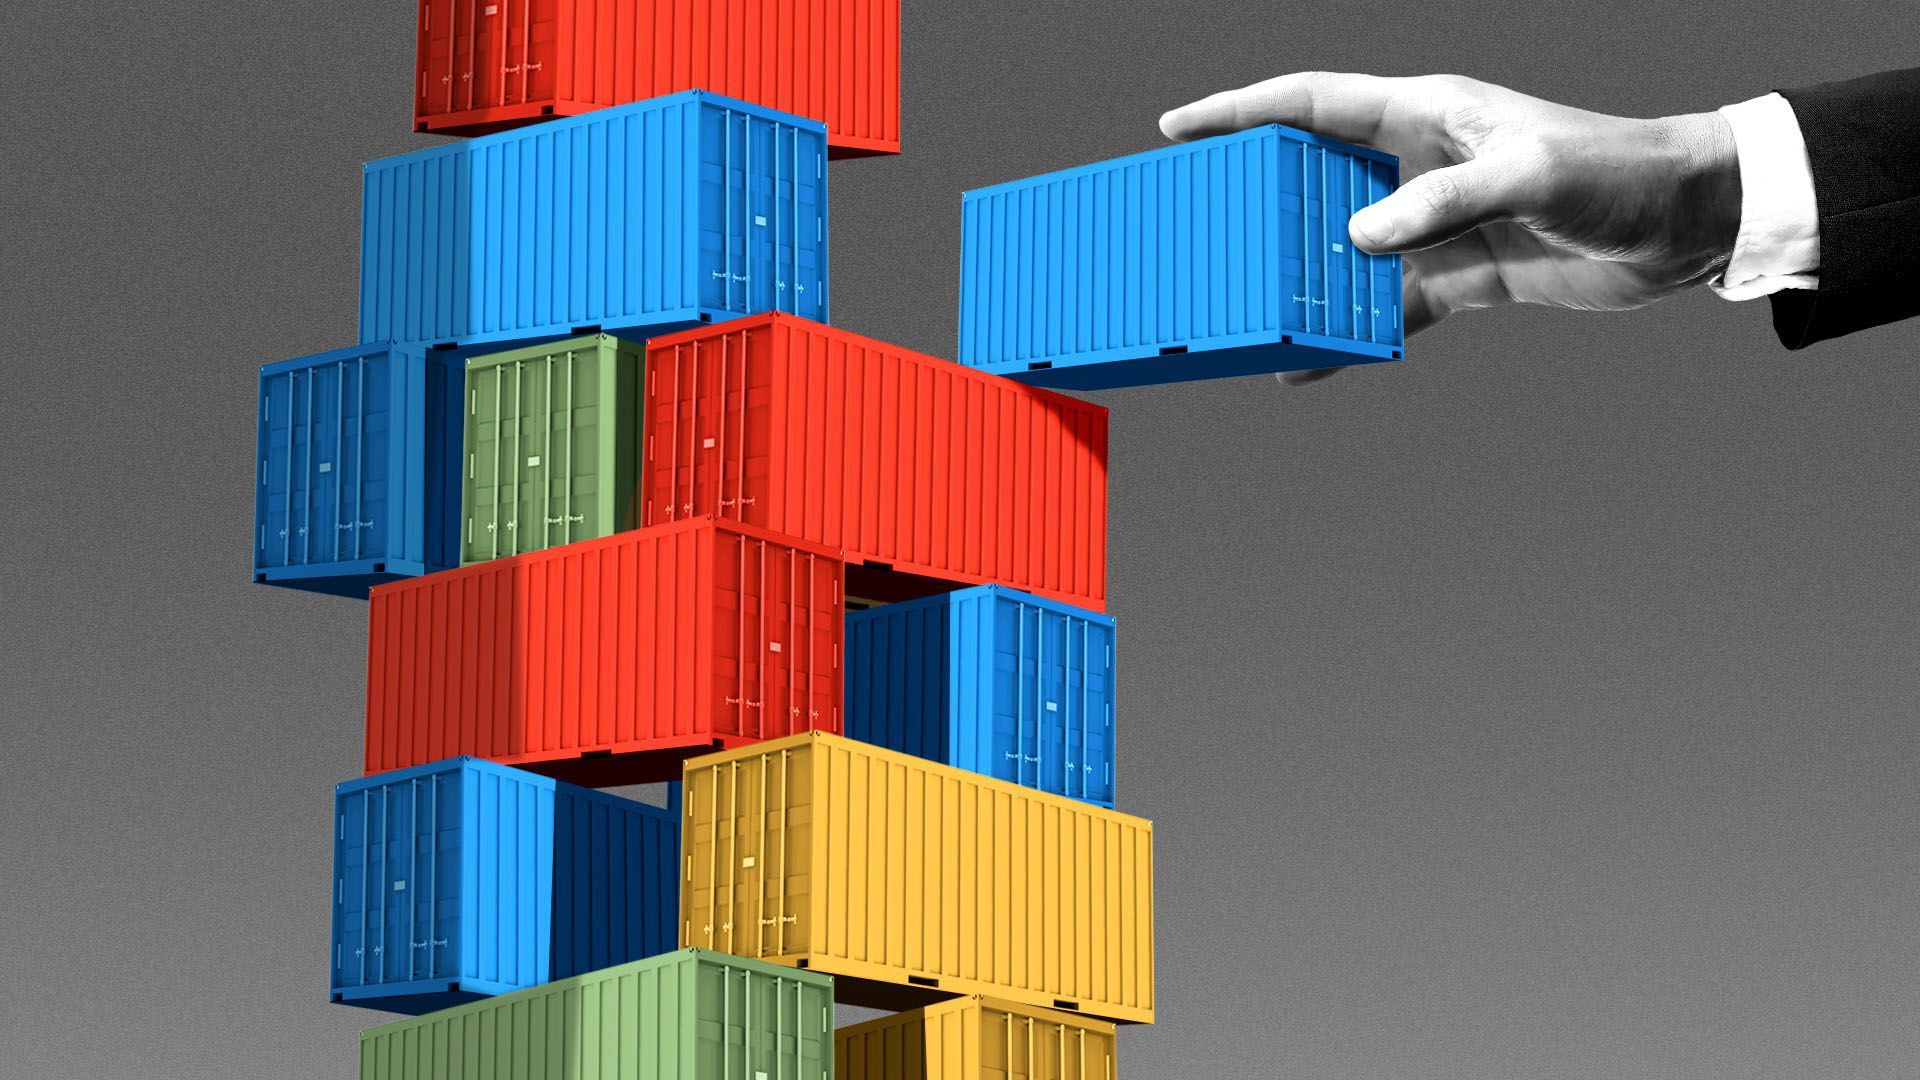 Illustration of a hand stacking shipping containers.